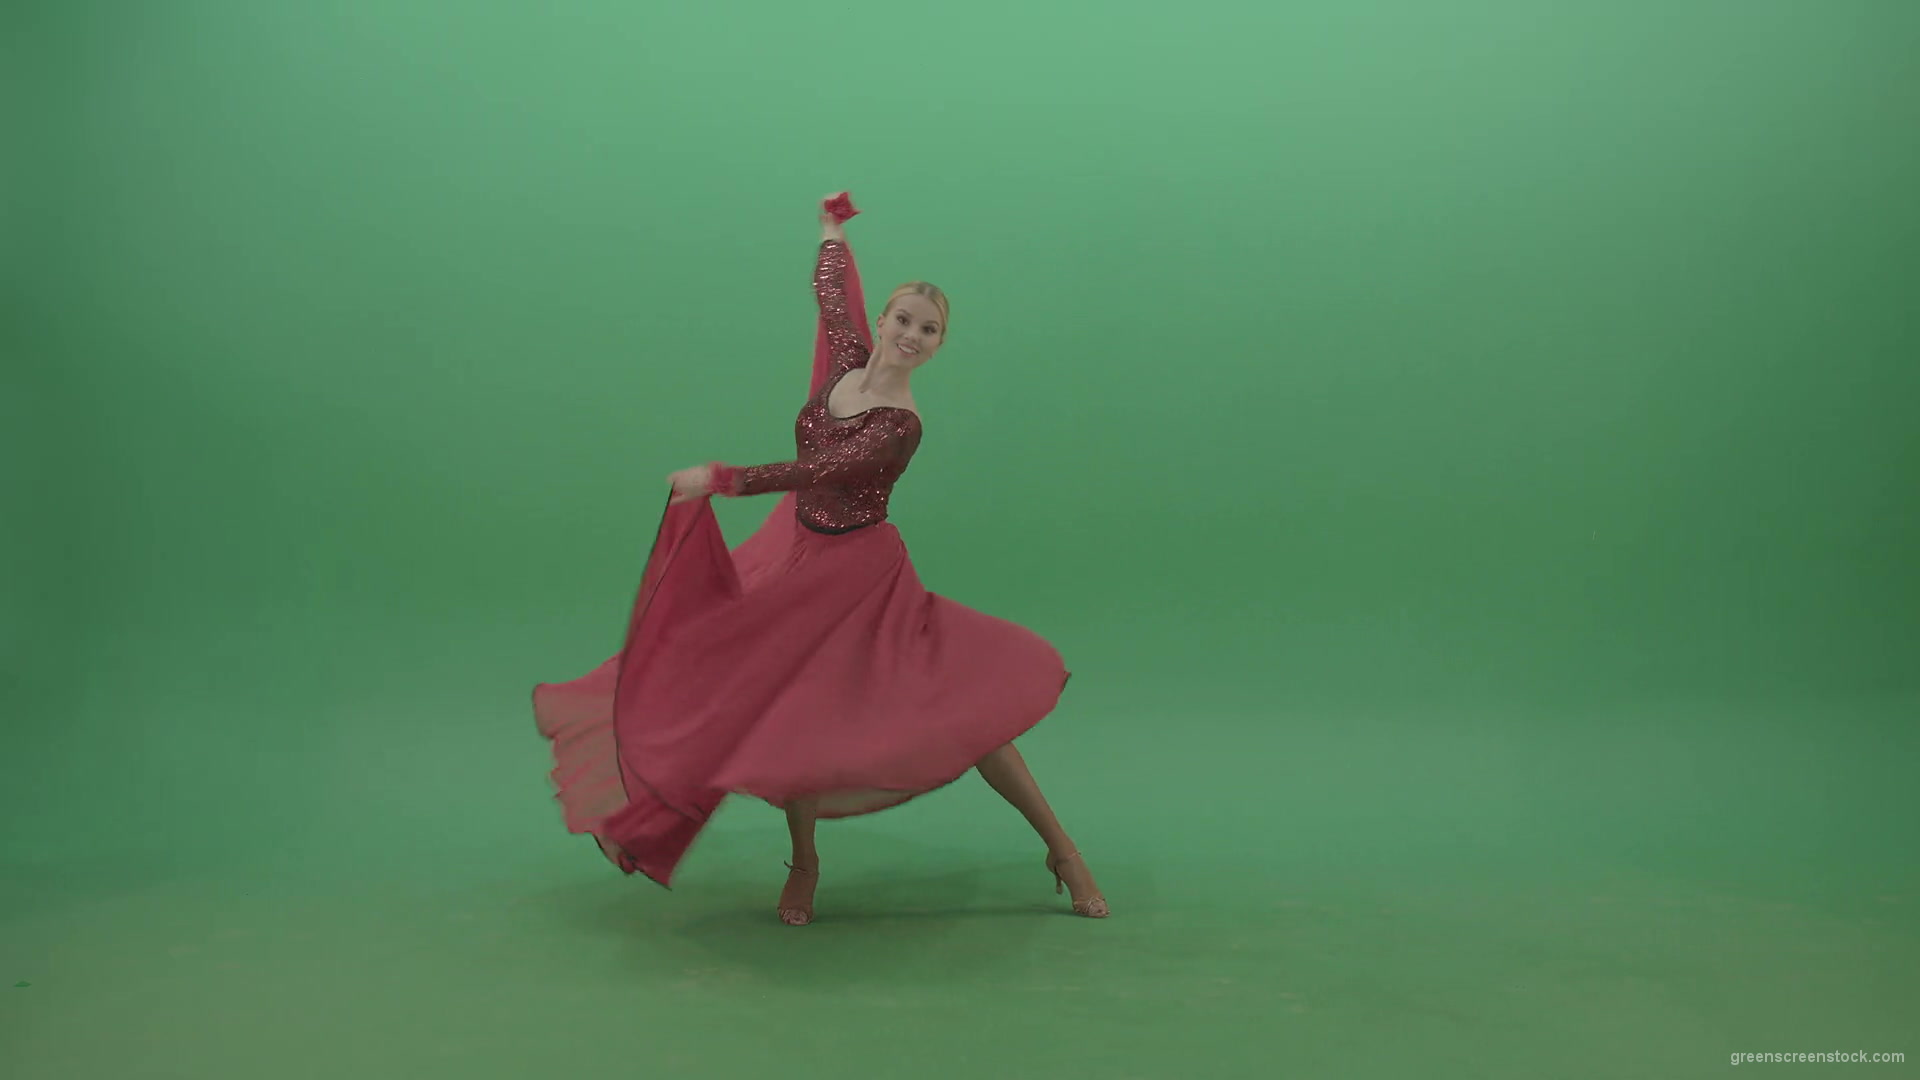 Spinning-woman-in-red-dress-showing-dance-flamenco-moves-over-green-screen-4K-Video-Footage-1920_006 Green Screen Stock